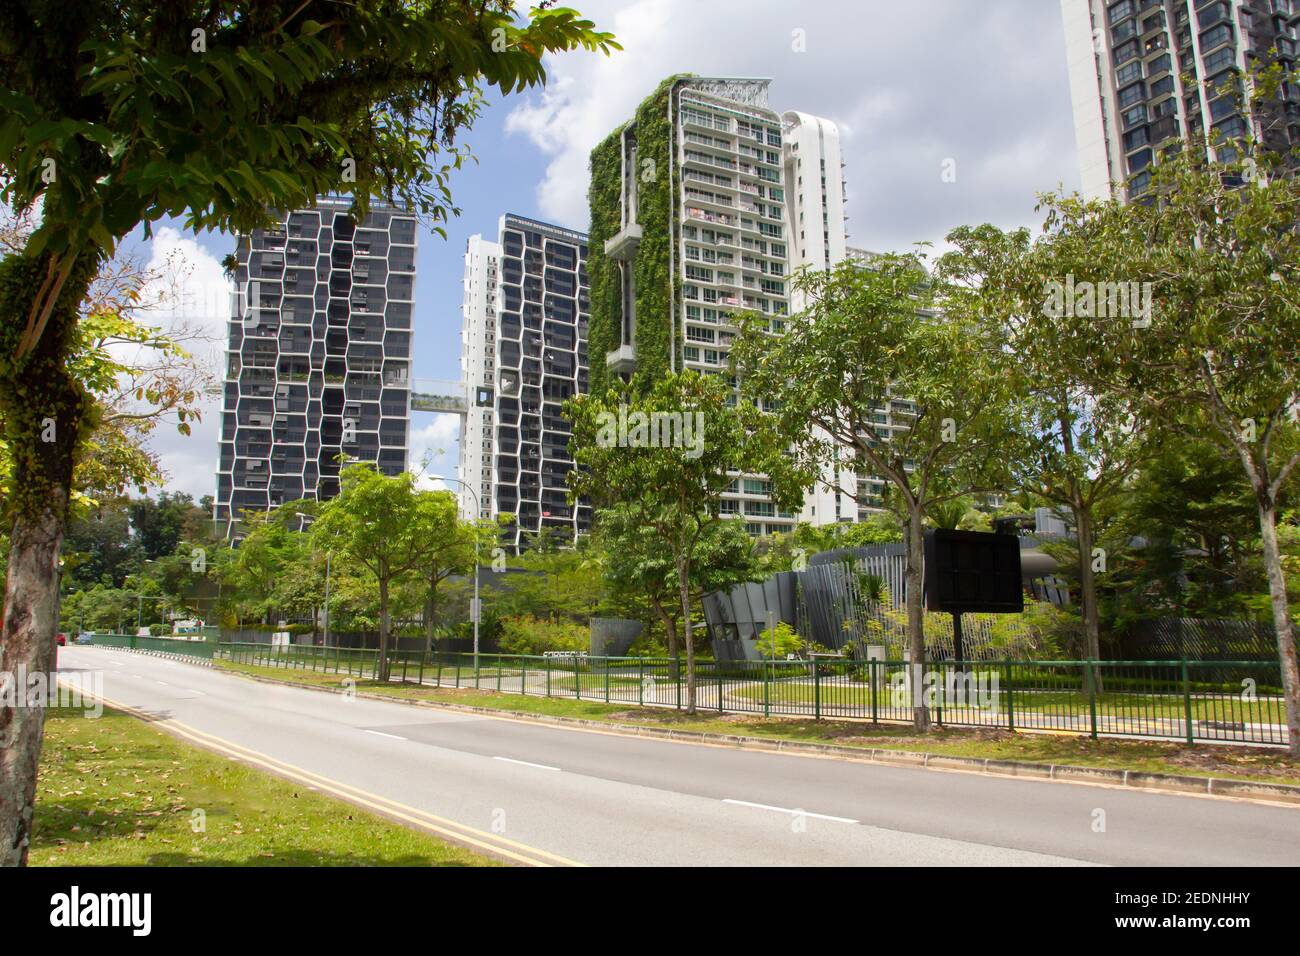 Street at Singapore with tall buildings in green grass and leaves Stock Photo